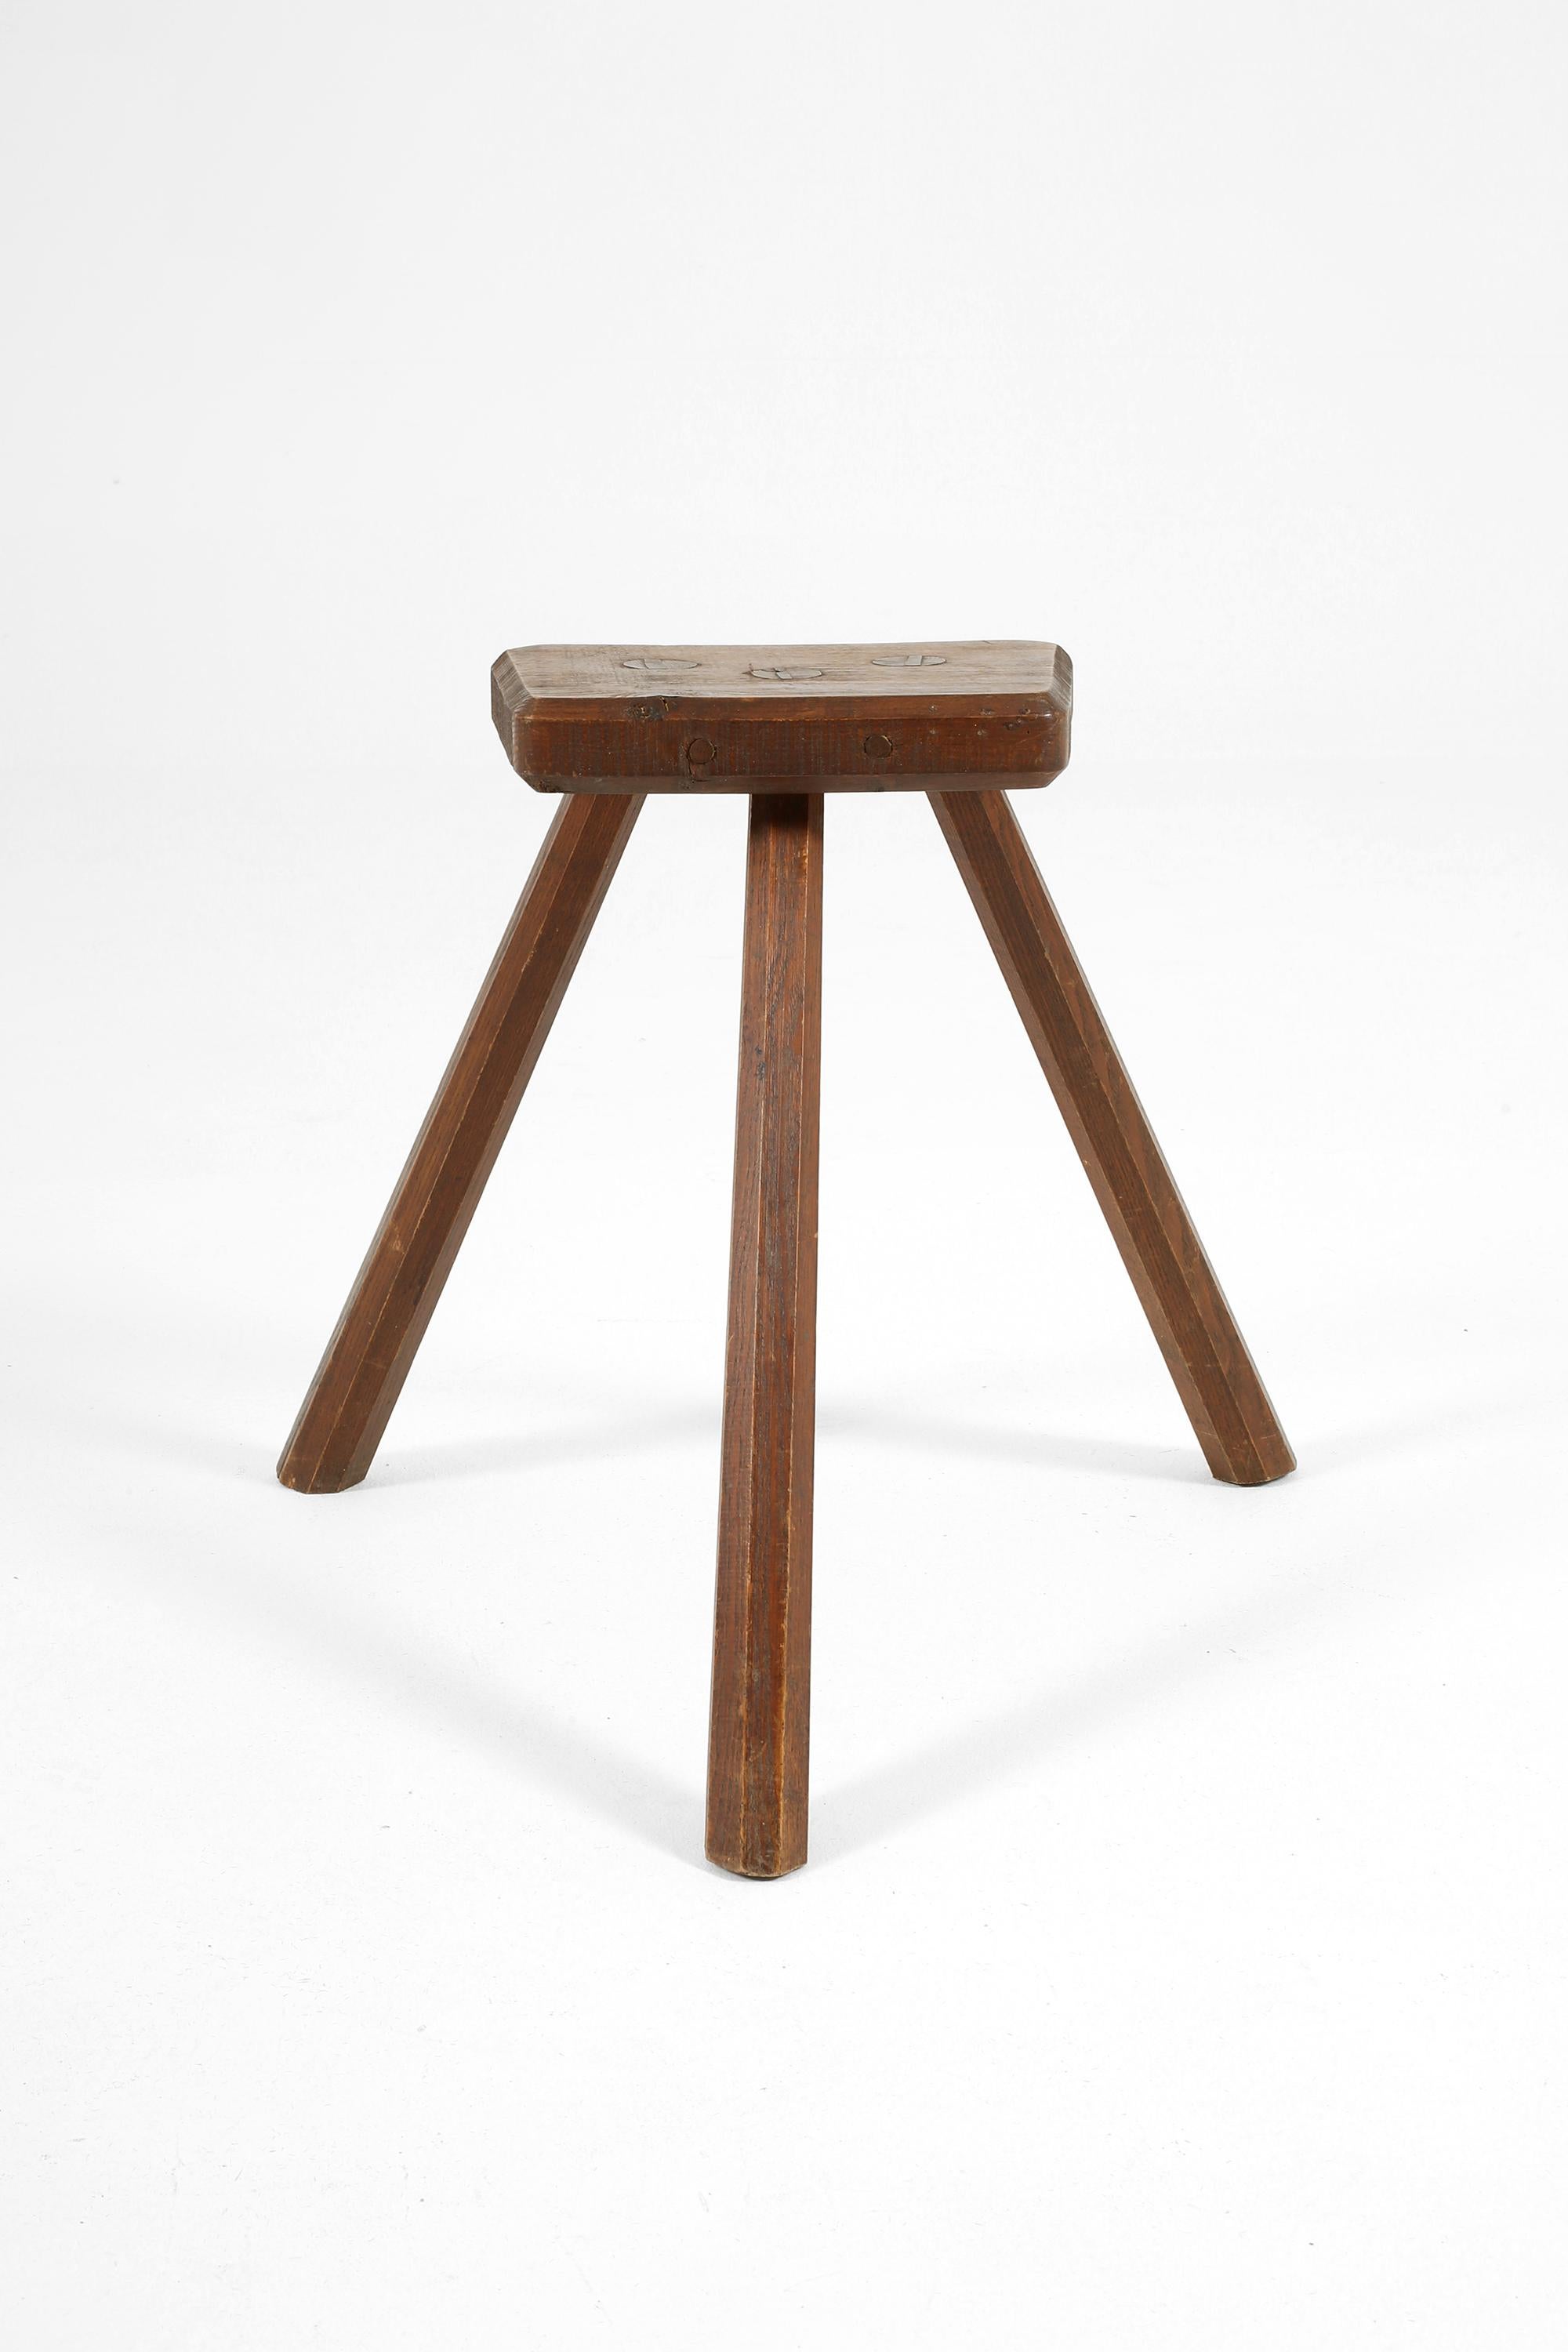 An early to mid 20th century wooden work stool with splayed tripod legs and exposed wedged tenon joints. English, c. 1940.

Top: W31 x D21 cm.